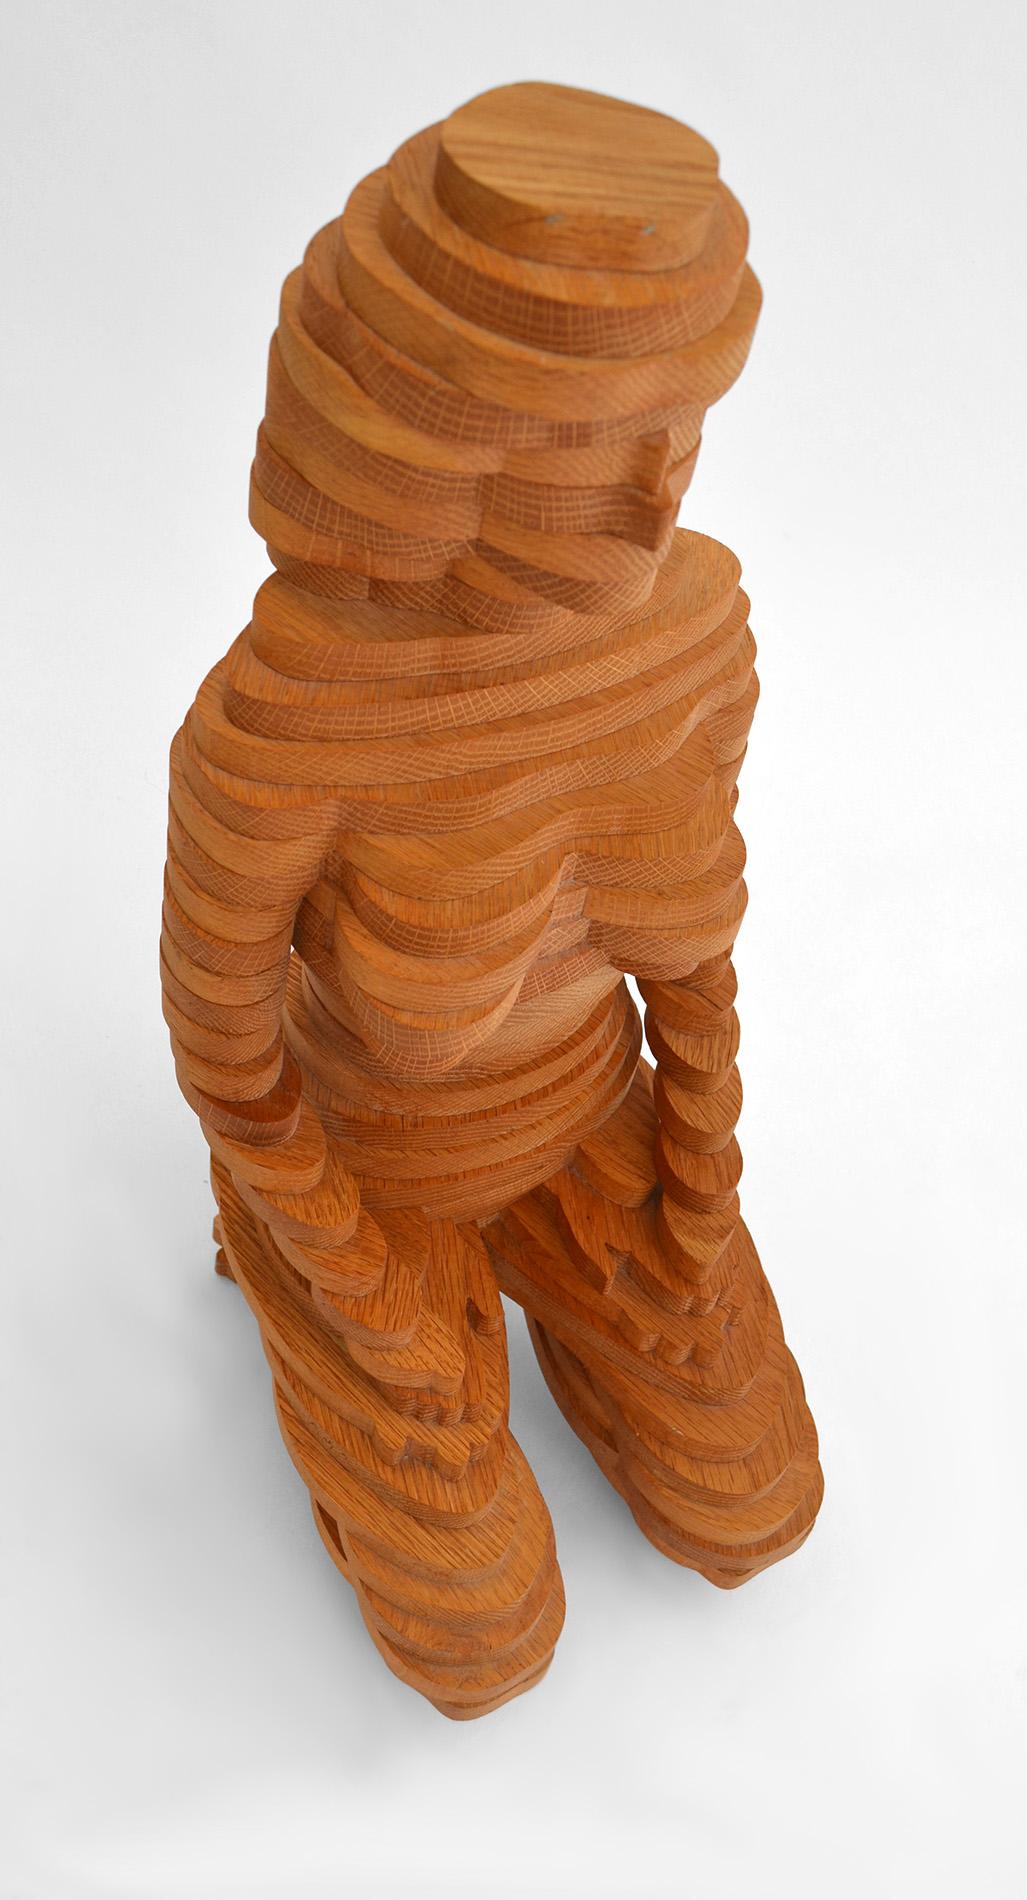 Female Sculpture in Joined Wood 3-D Cubist Surrealist by Reuben Karol, USA 1990s In Good Condition For Sale In Ft Lauderdale, FL